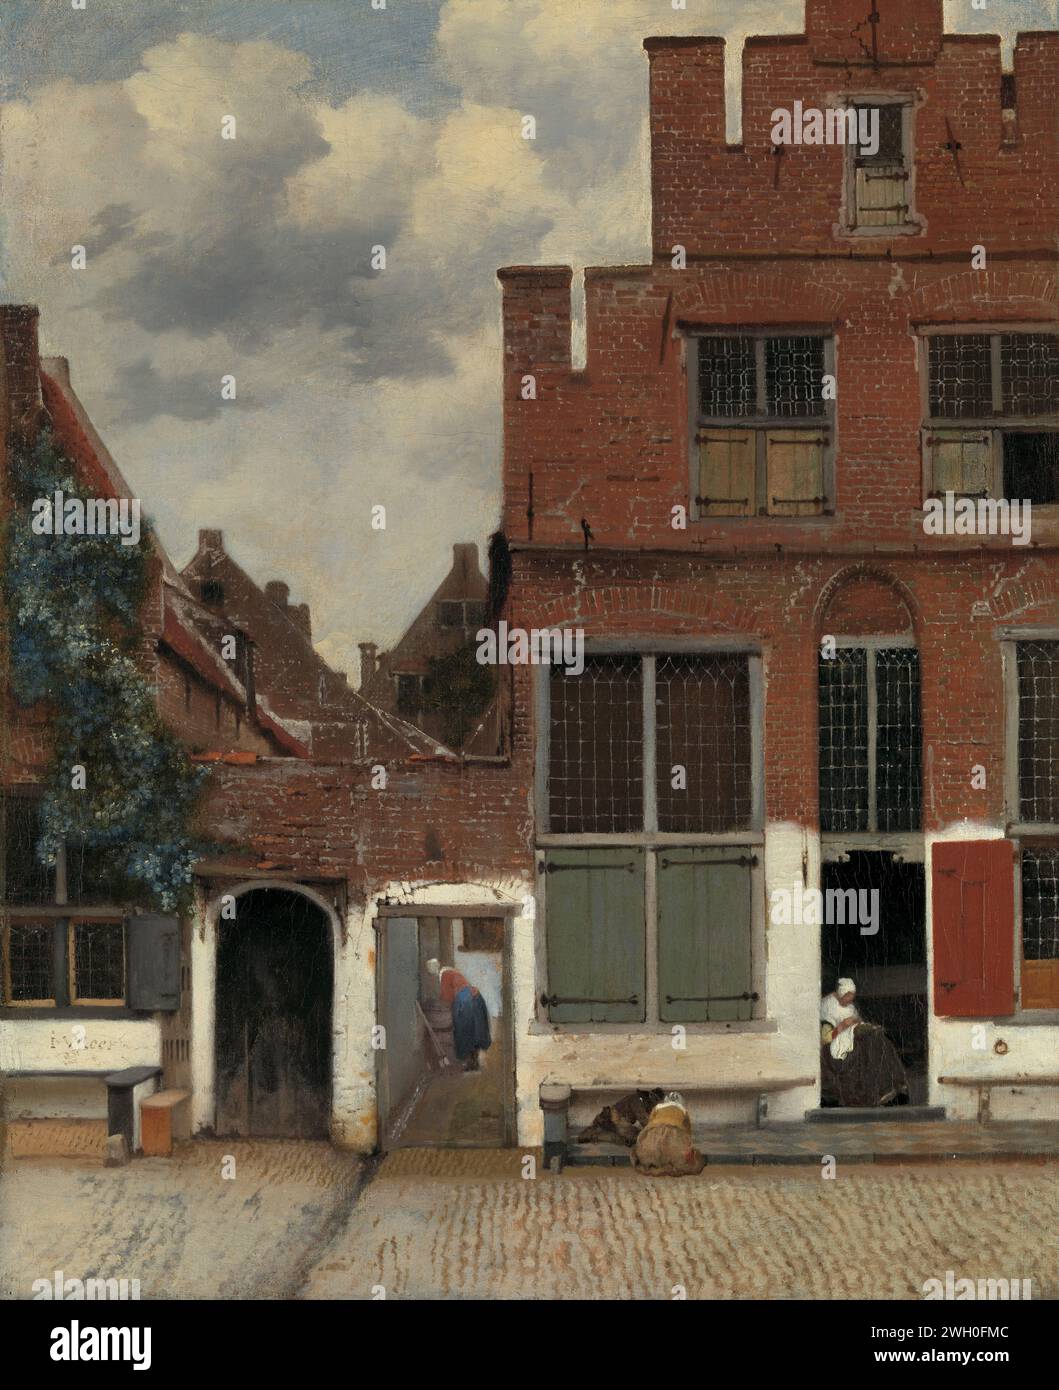 View of Houses in Delft, Known as ‘The Little Street’, Johannes Vermeer, c. 1658 painting View of Huizen in Delft, known as 'the street'. The facades of a few houses on a street in Delft. Between the houses an alley where a woman is bent over a wash. In the open door of the house on the right, a woman is crafted, left in front of the house on the sidewalk two children playing.  canvas. oil paint (paint)  street. civic architecture; edifices; dwellings. children's games and plays (+ out of doors (sports, games, etc.)). home sewing; repair of clothes Delft Stock Photo